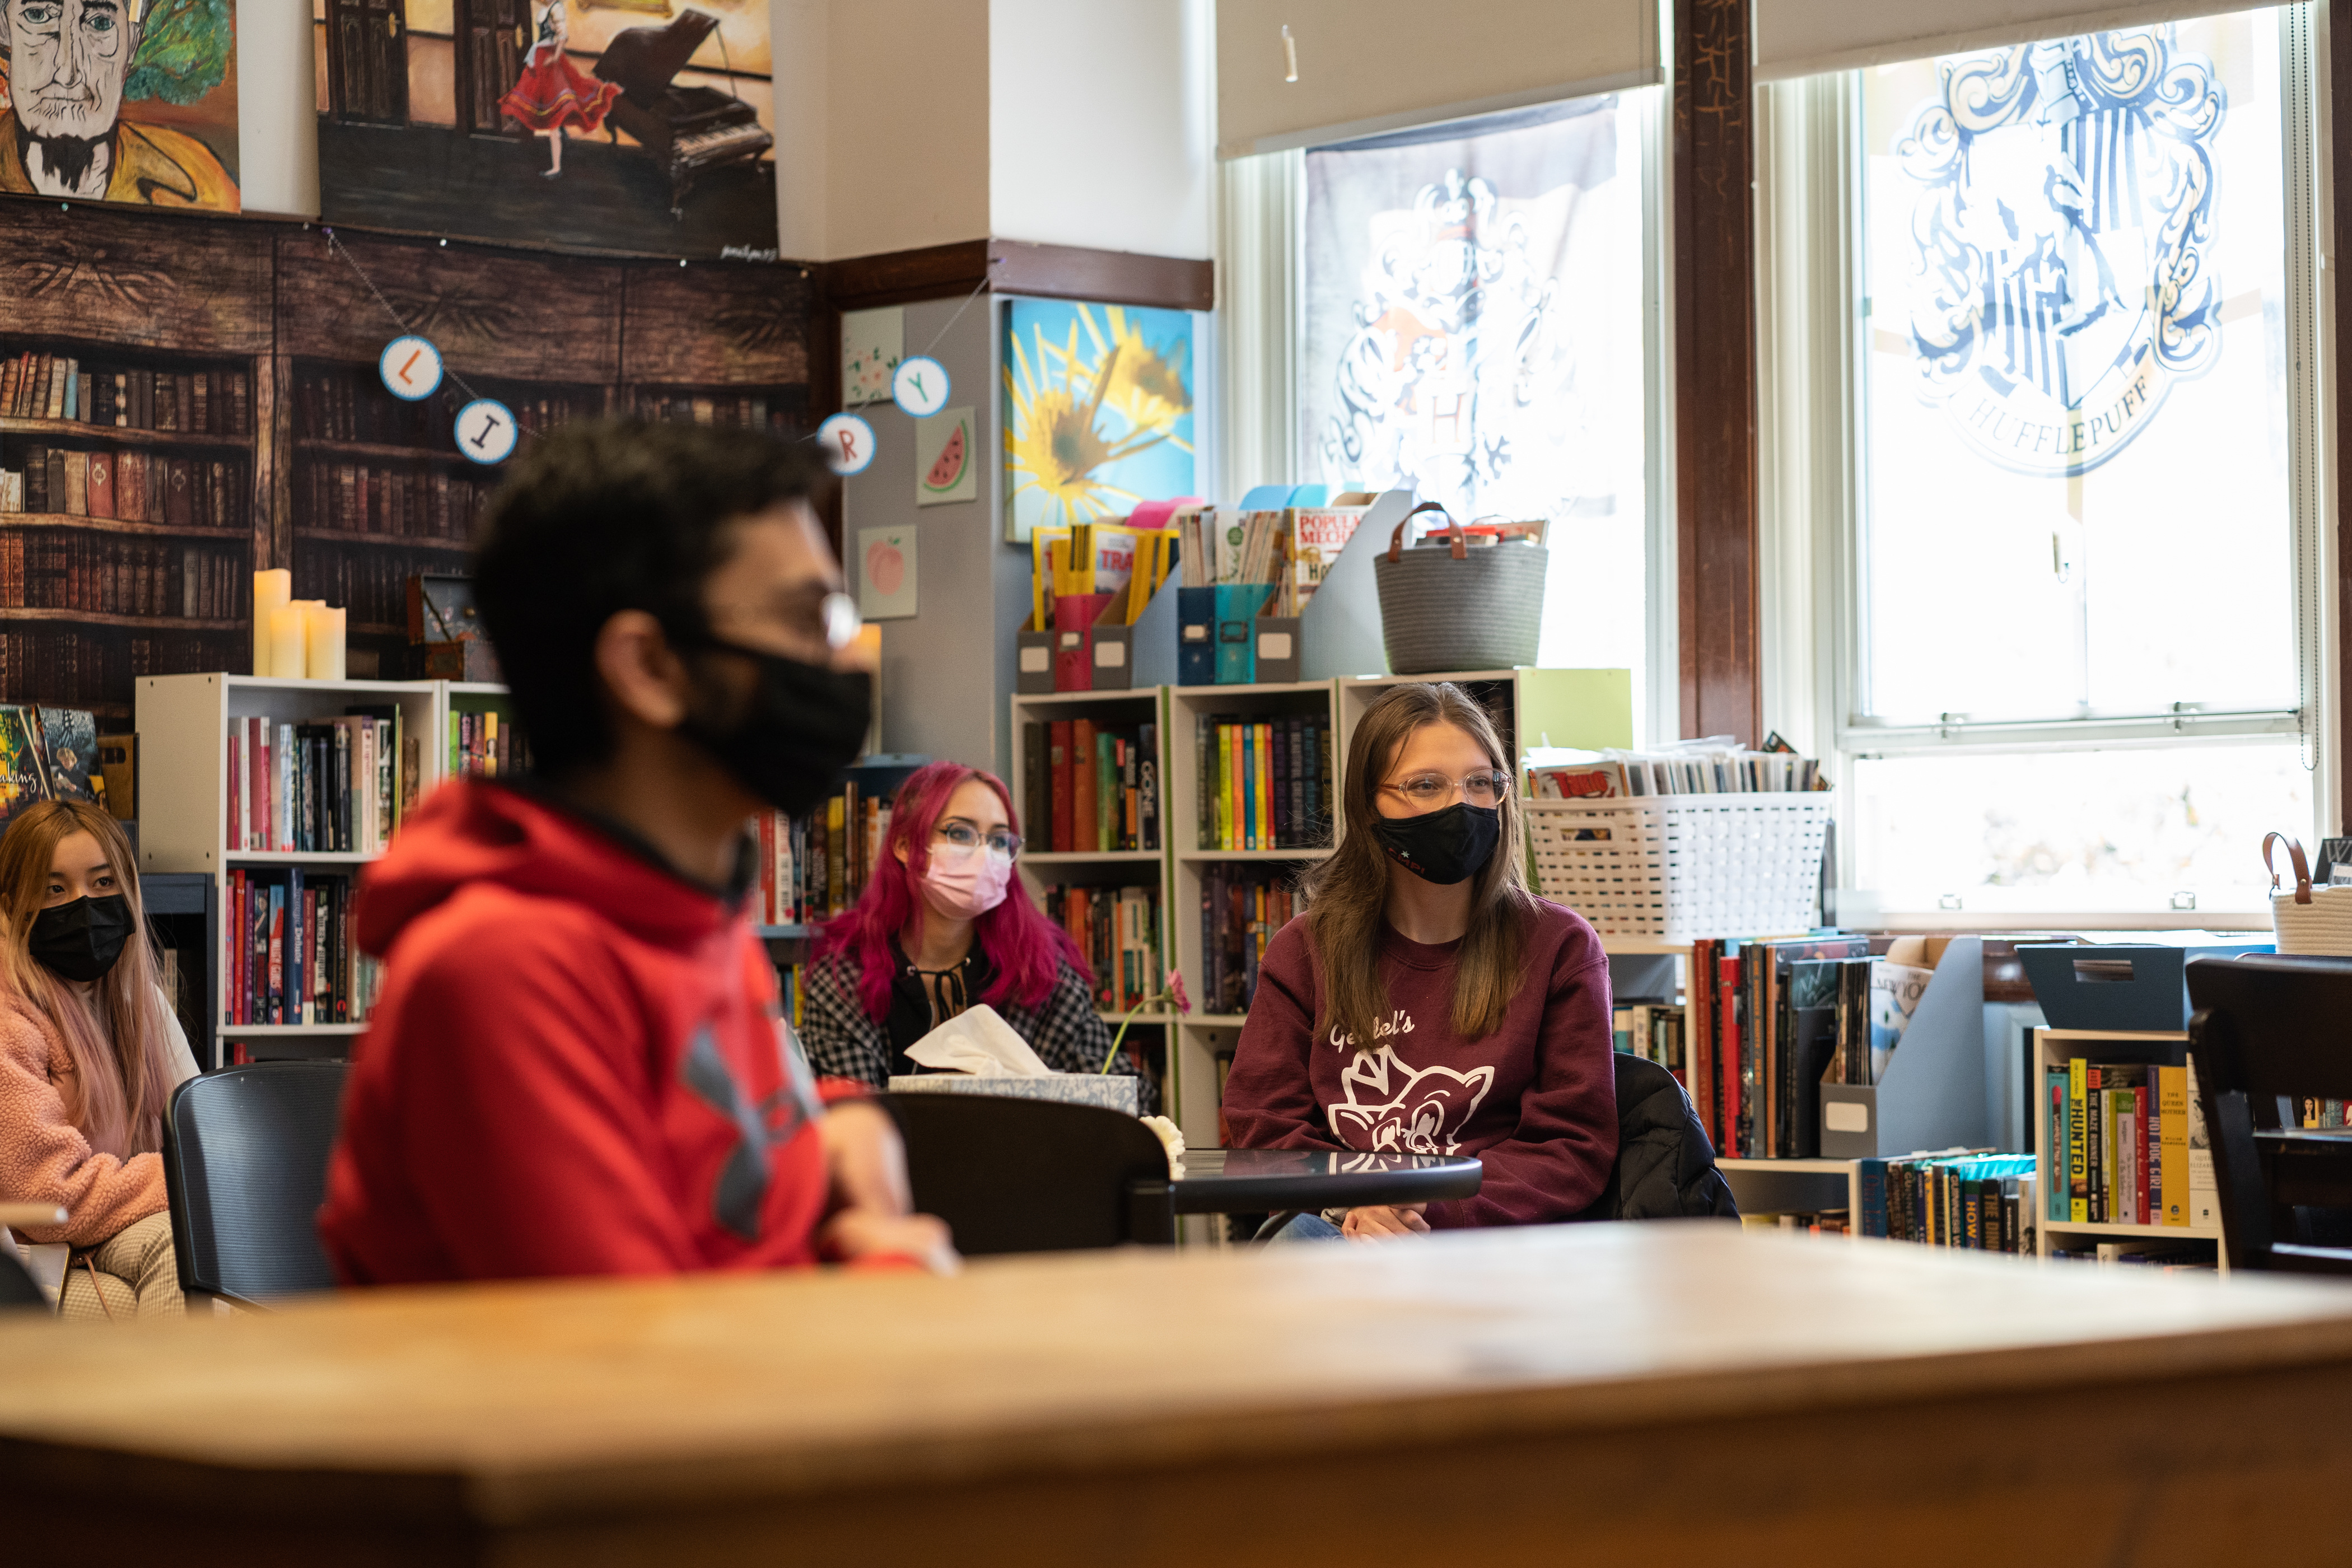 Students discuss plans in class, sitting in distanced desks wearing protective masks.